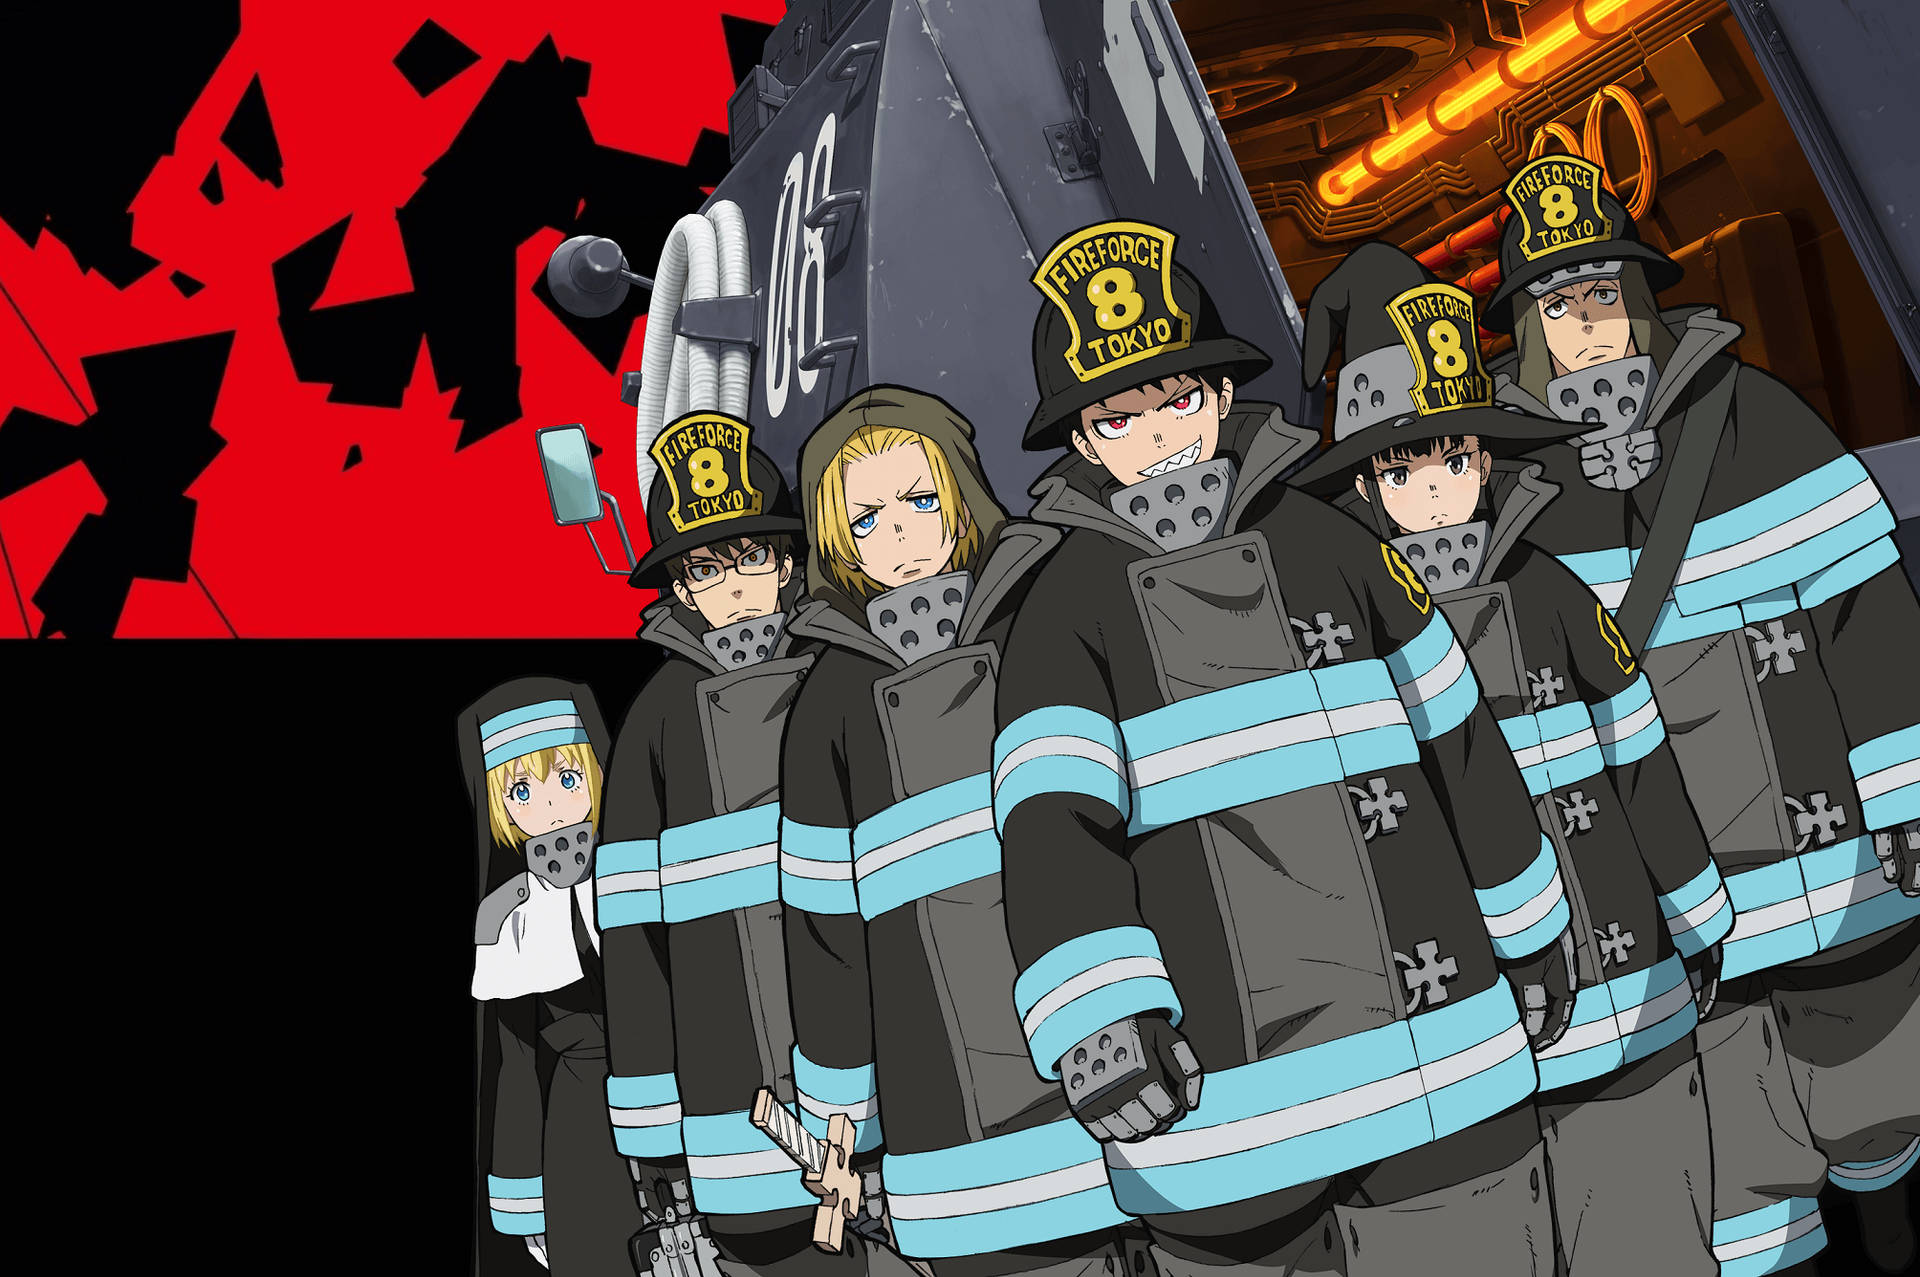 Join the brave members of Fire Force Company 8! Wallpaper